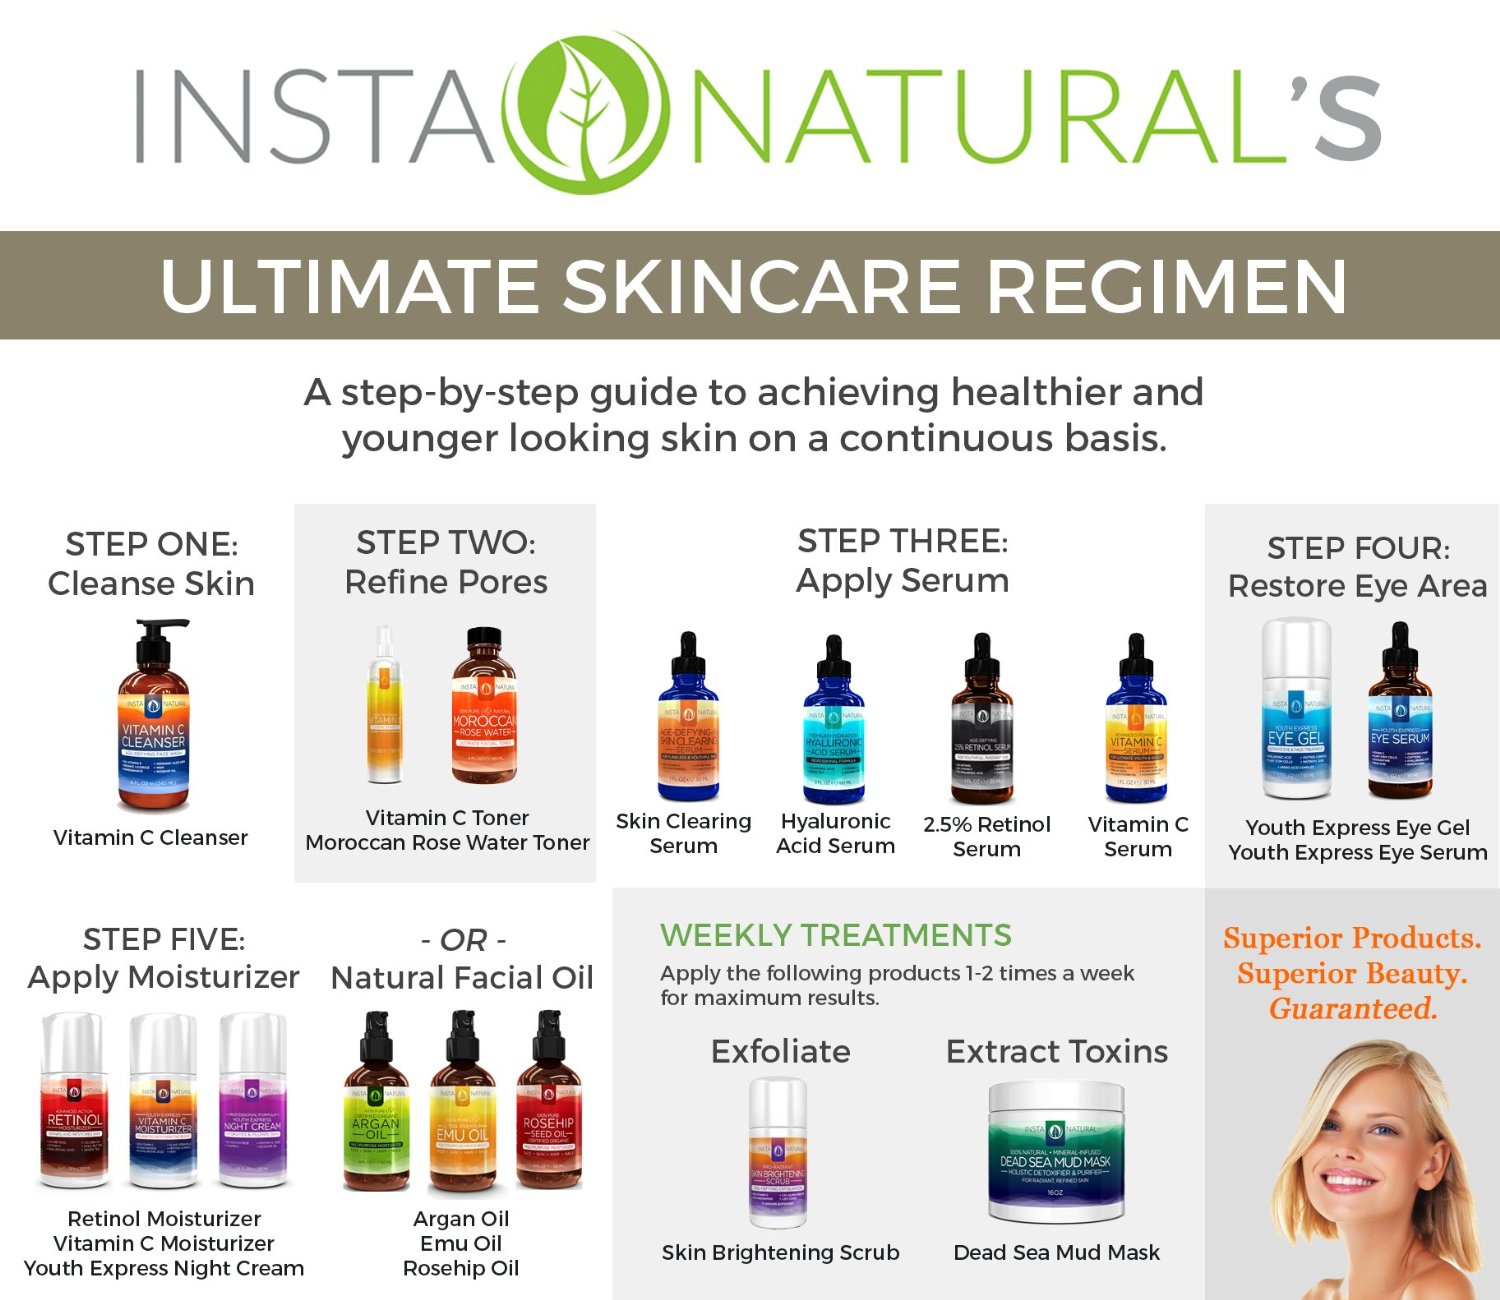 The Ultimate Skincare Regimen with InstaNatural